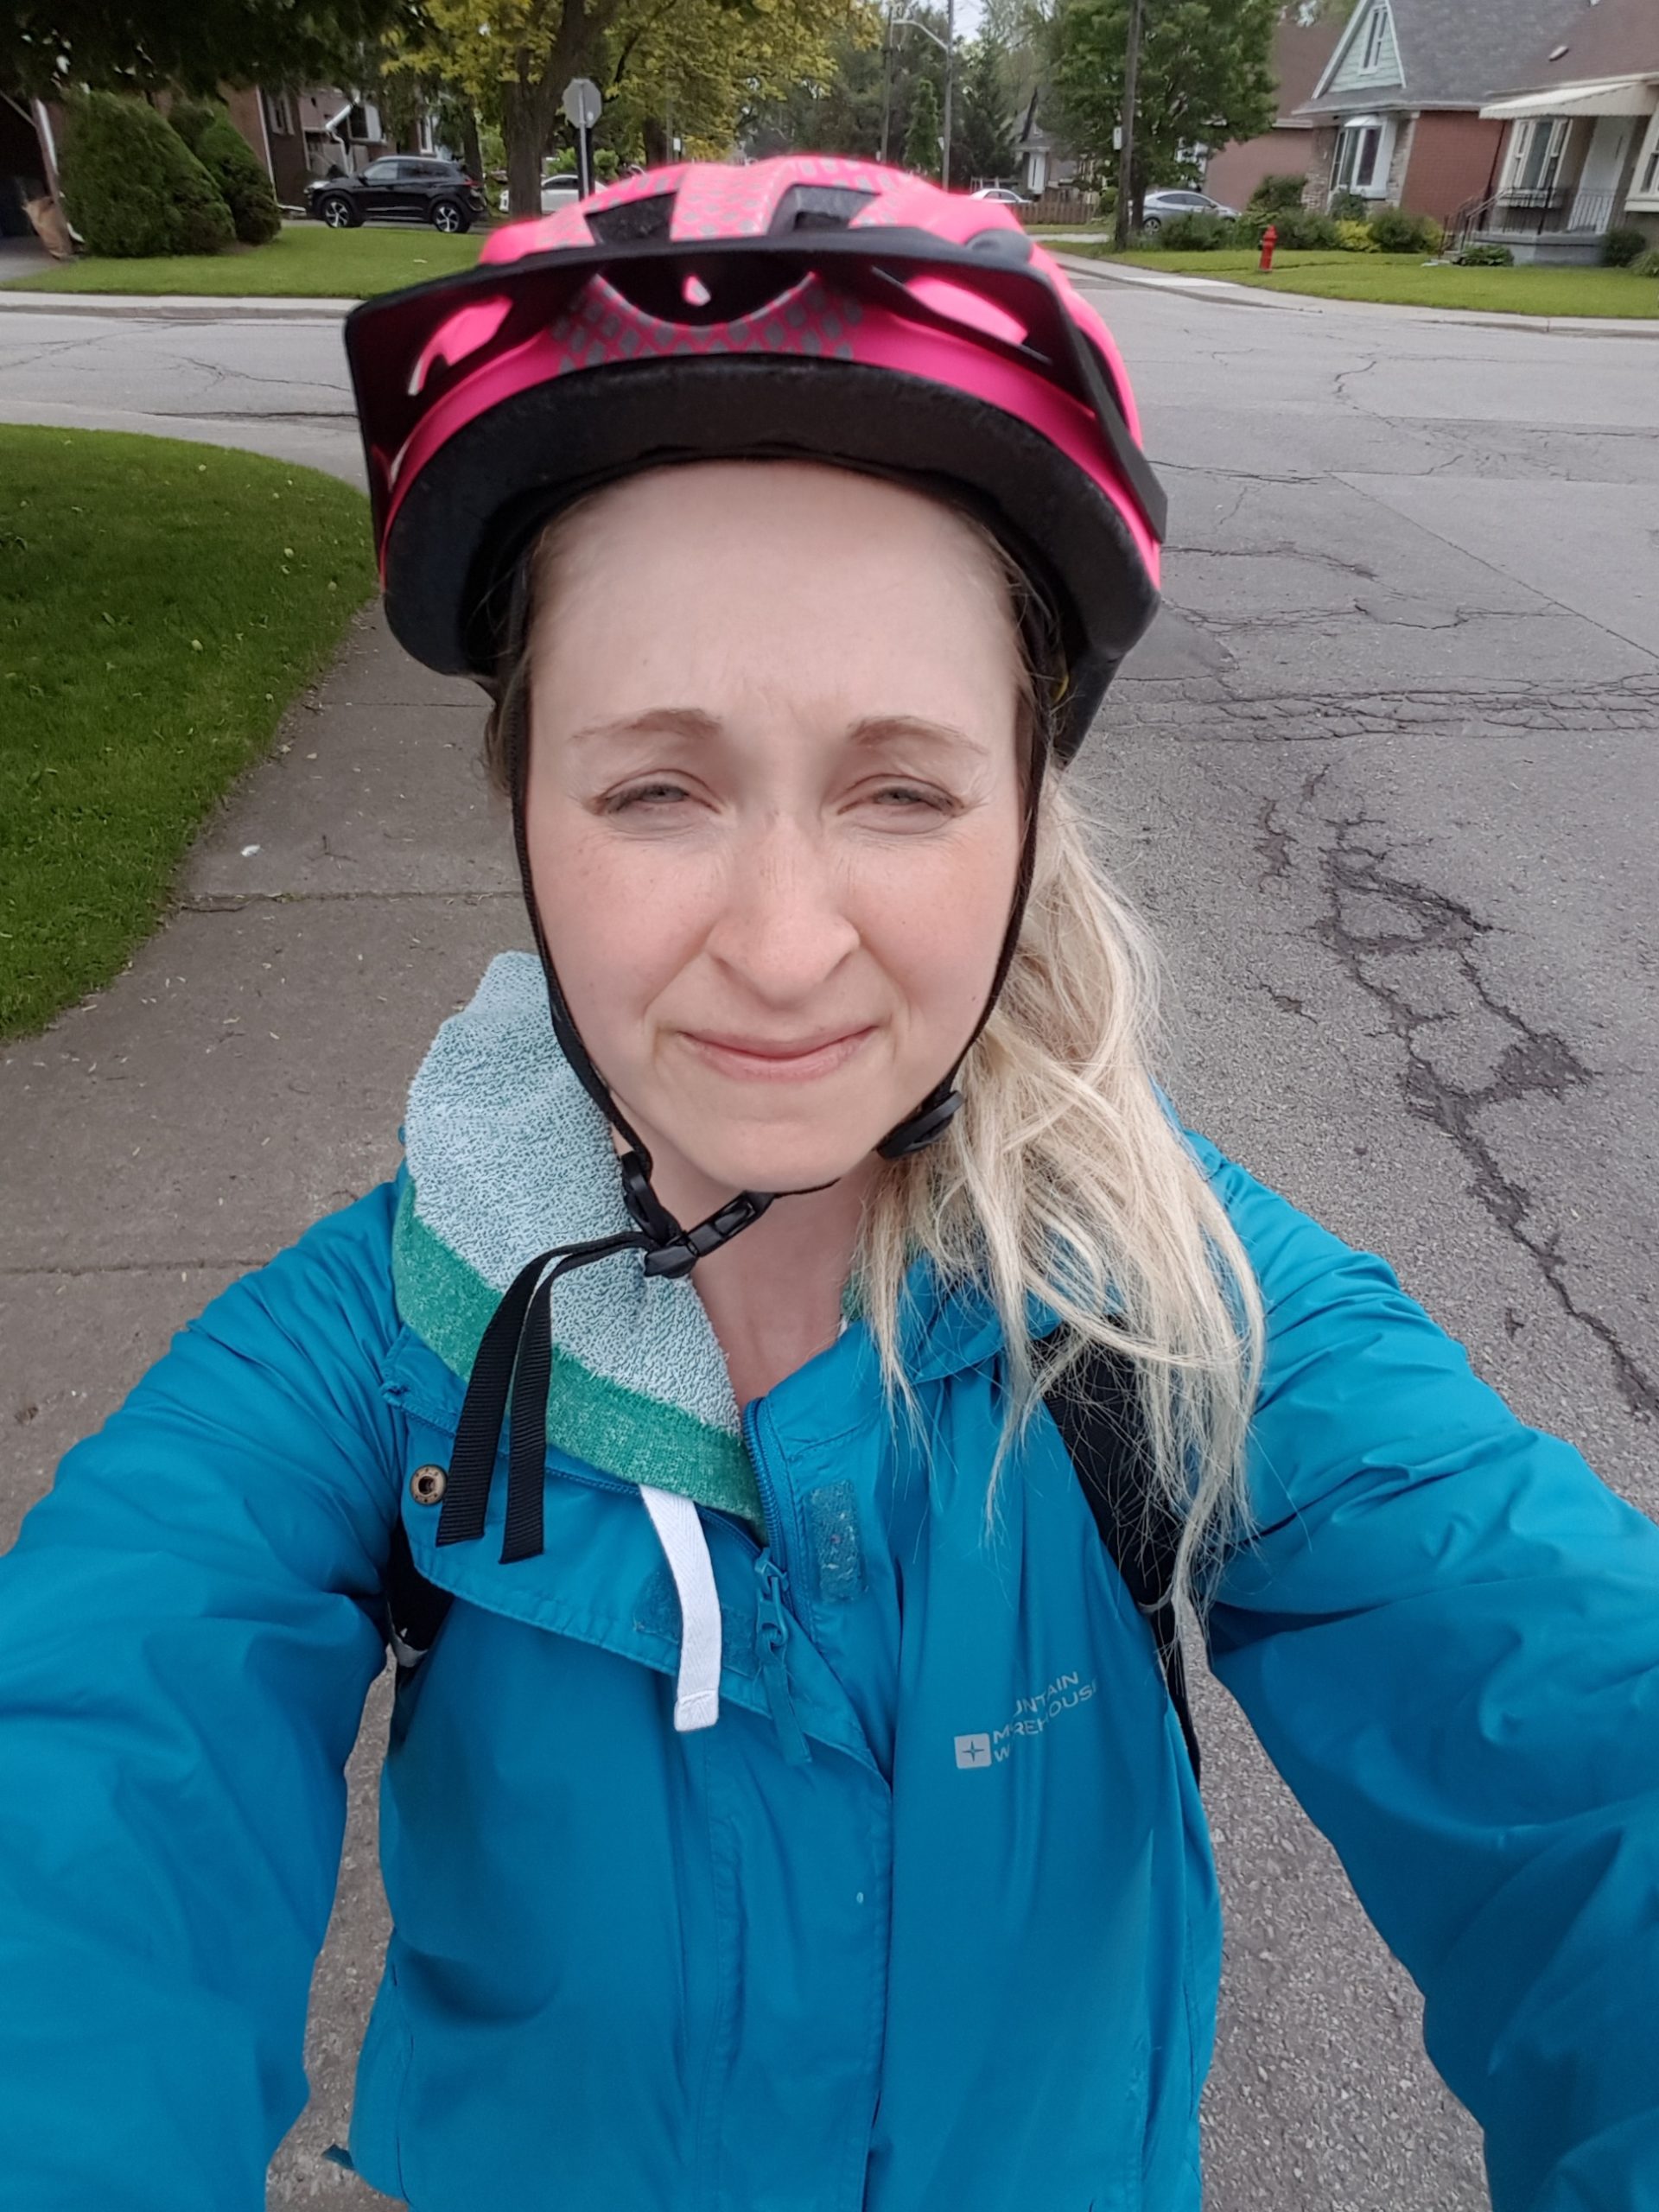 A woman with a blue coat and a bike helmet